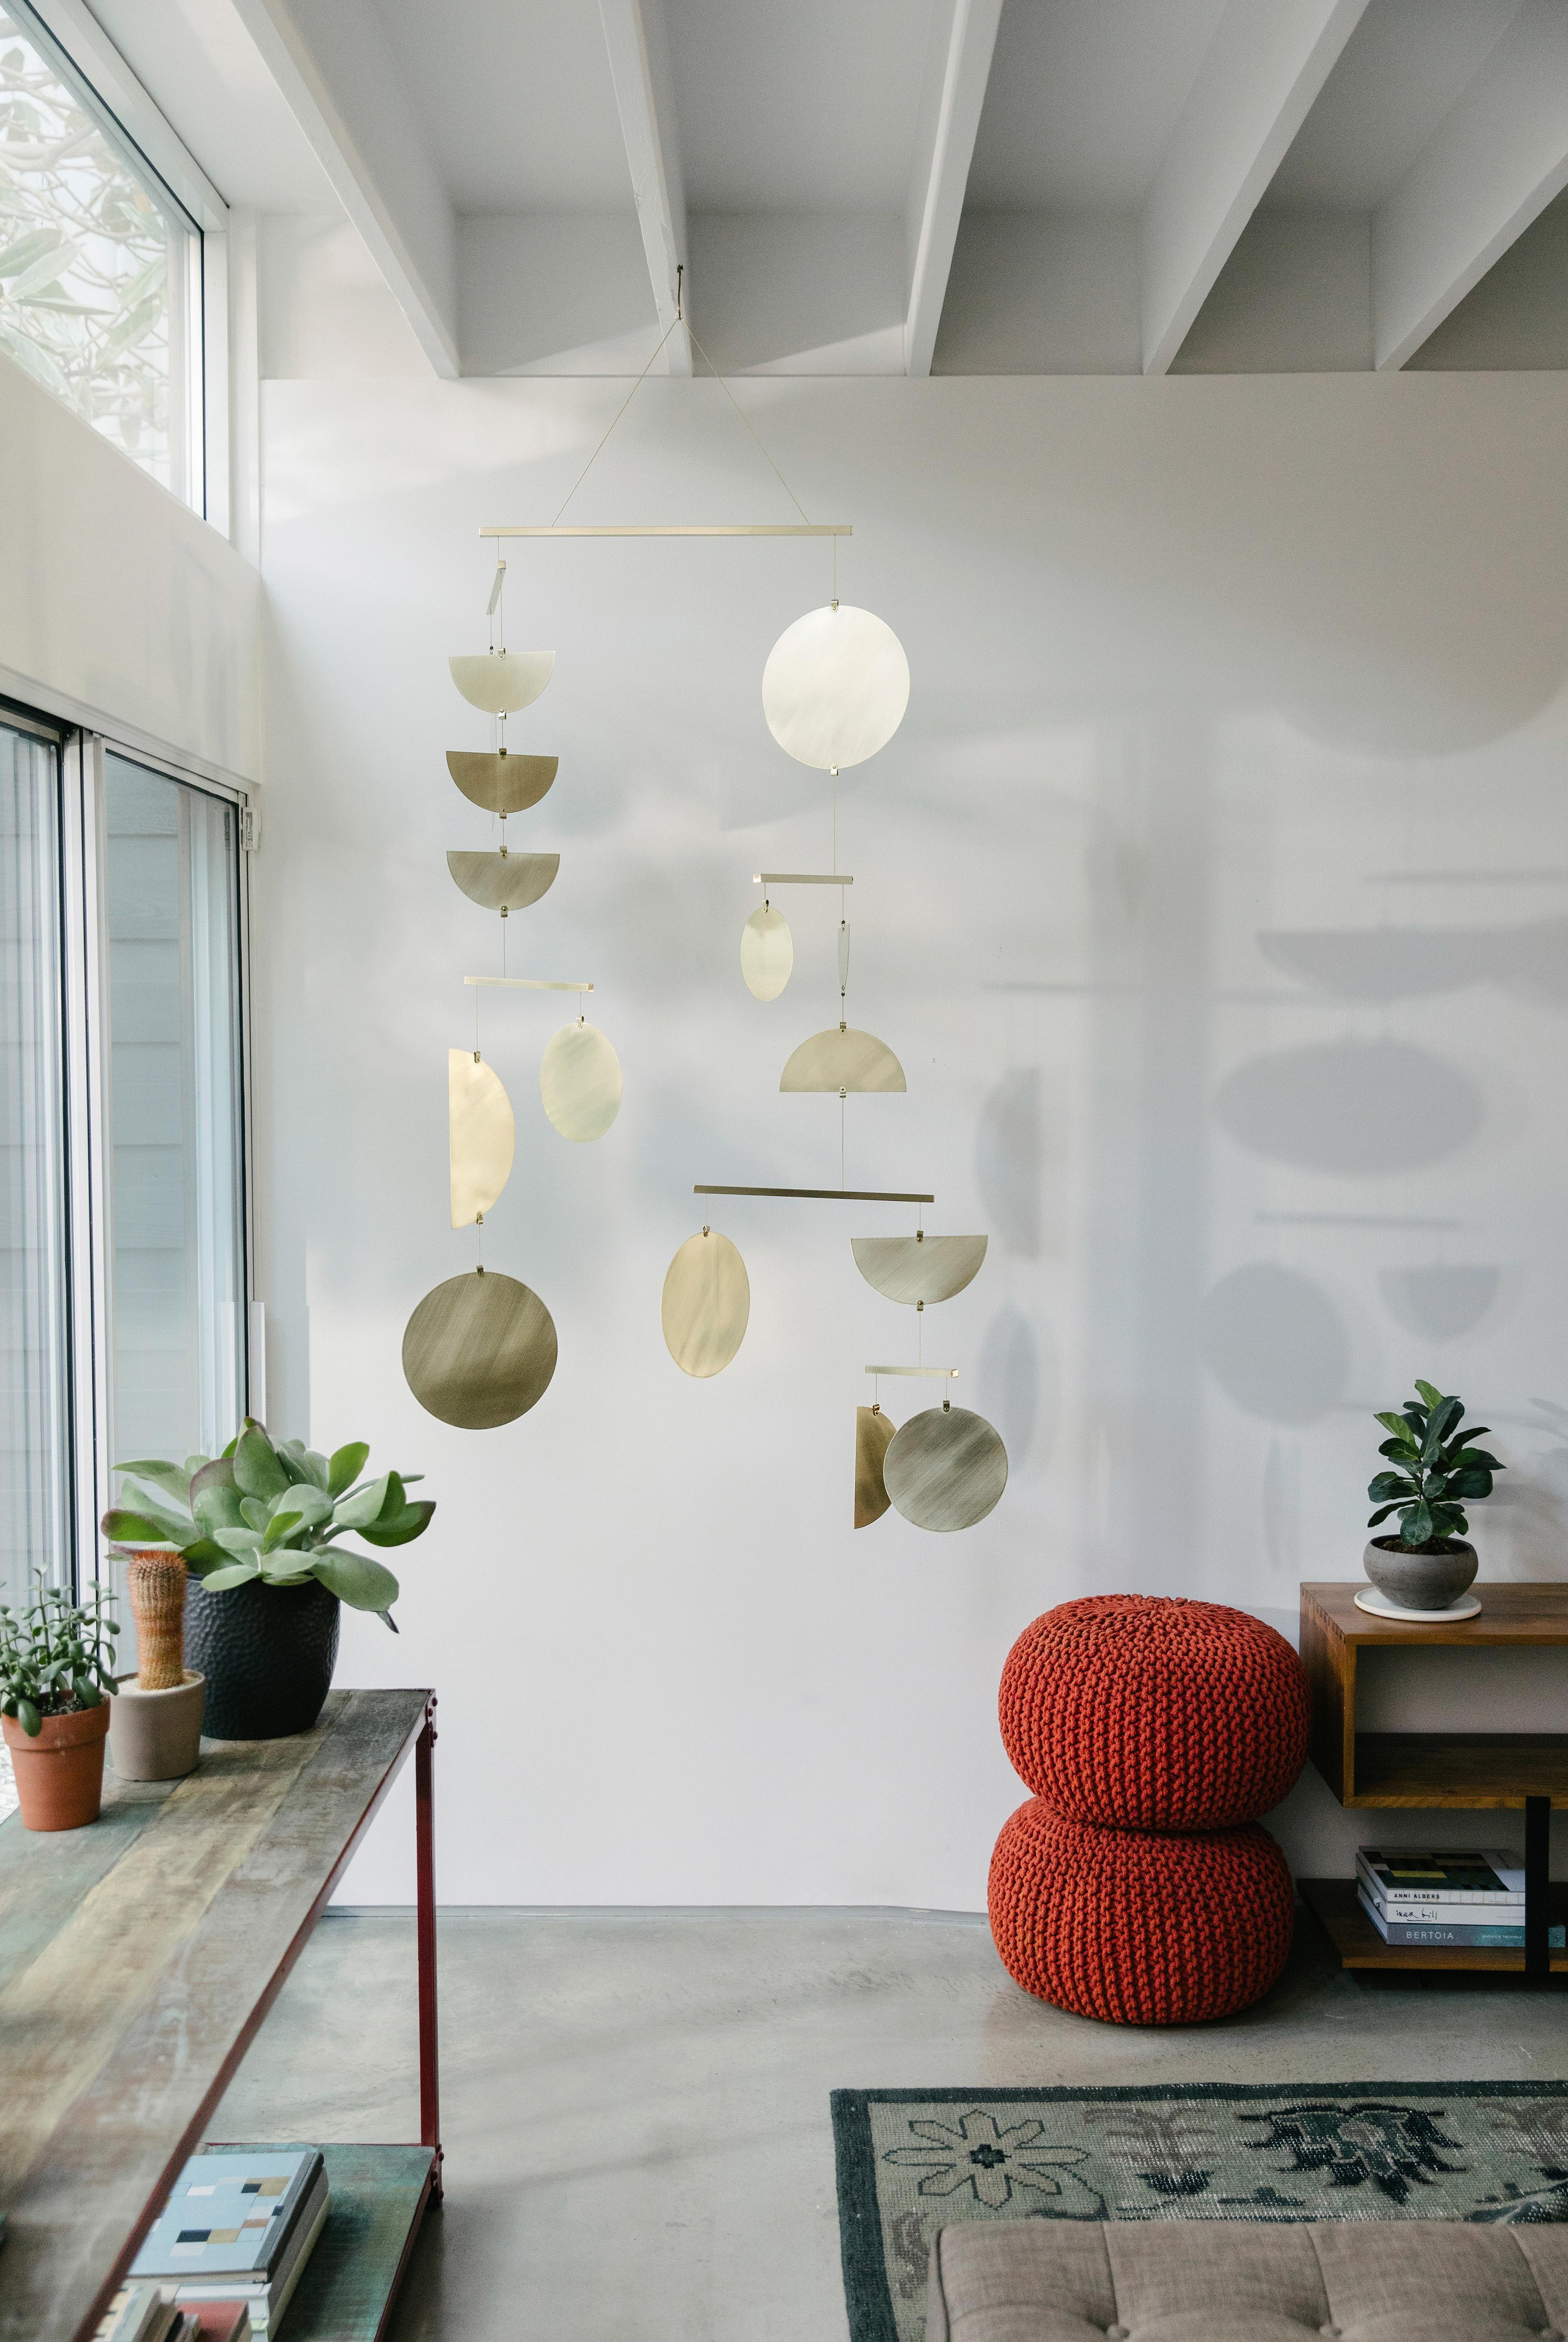 The Continuum Mobile is our most stunning mobile in both design and scale with visually cacophonous clusters of shapes that artfully glide between each other. This statement piece is ideal for large open spaces and stairwells to highlight its